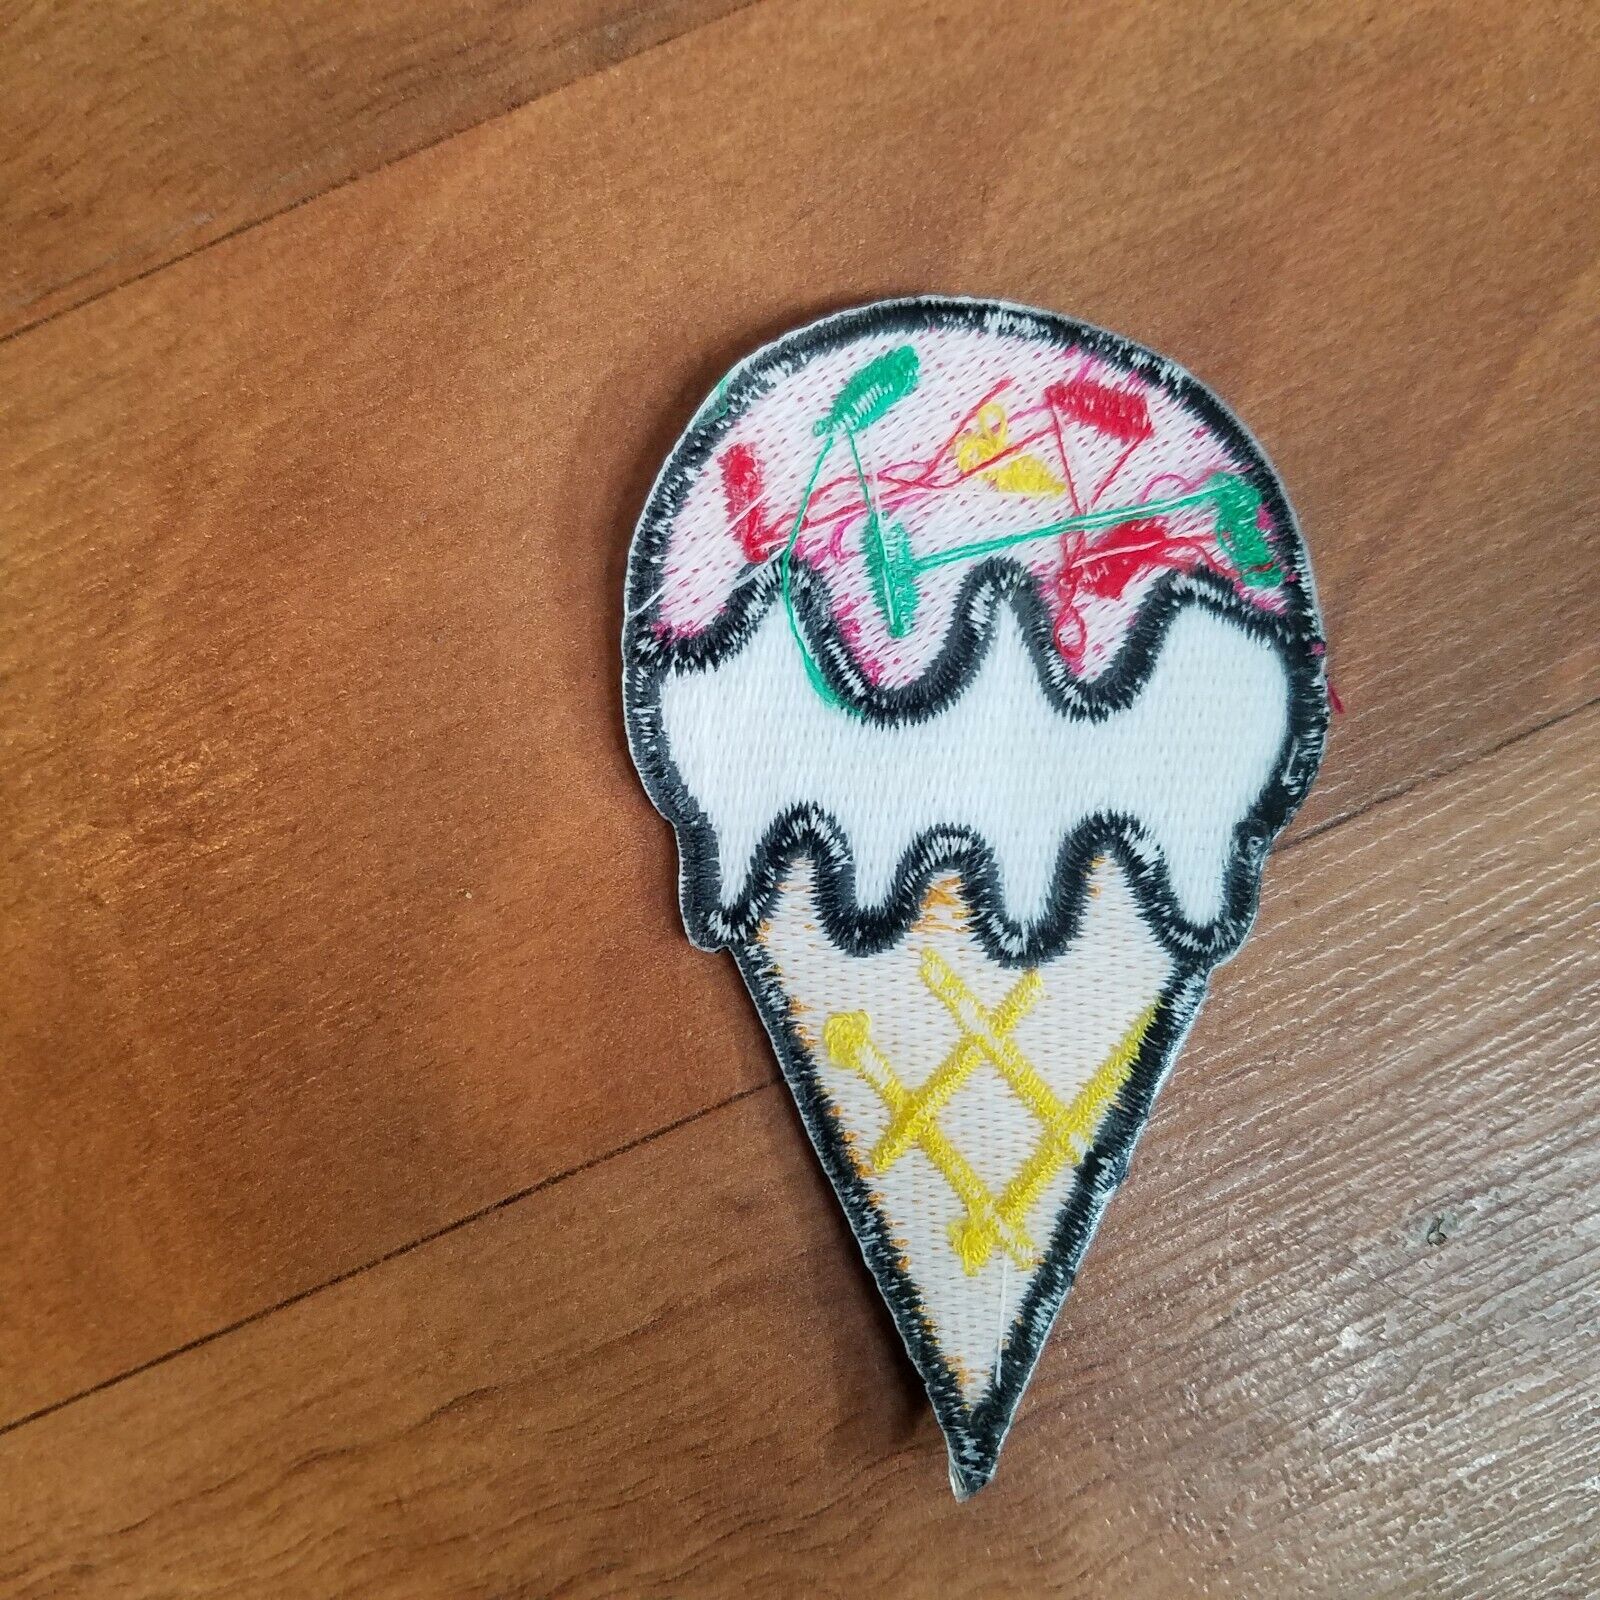 Ice cream cone w/sprinkles 3" by 2" Iron-on or Sew Embroidered Applique Patch  Без бренда - фотография #3